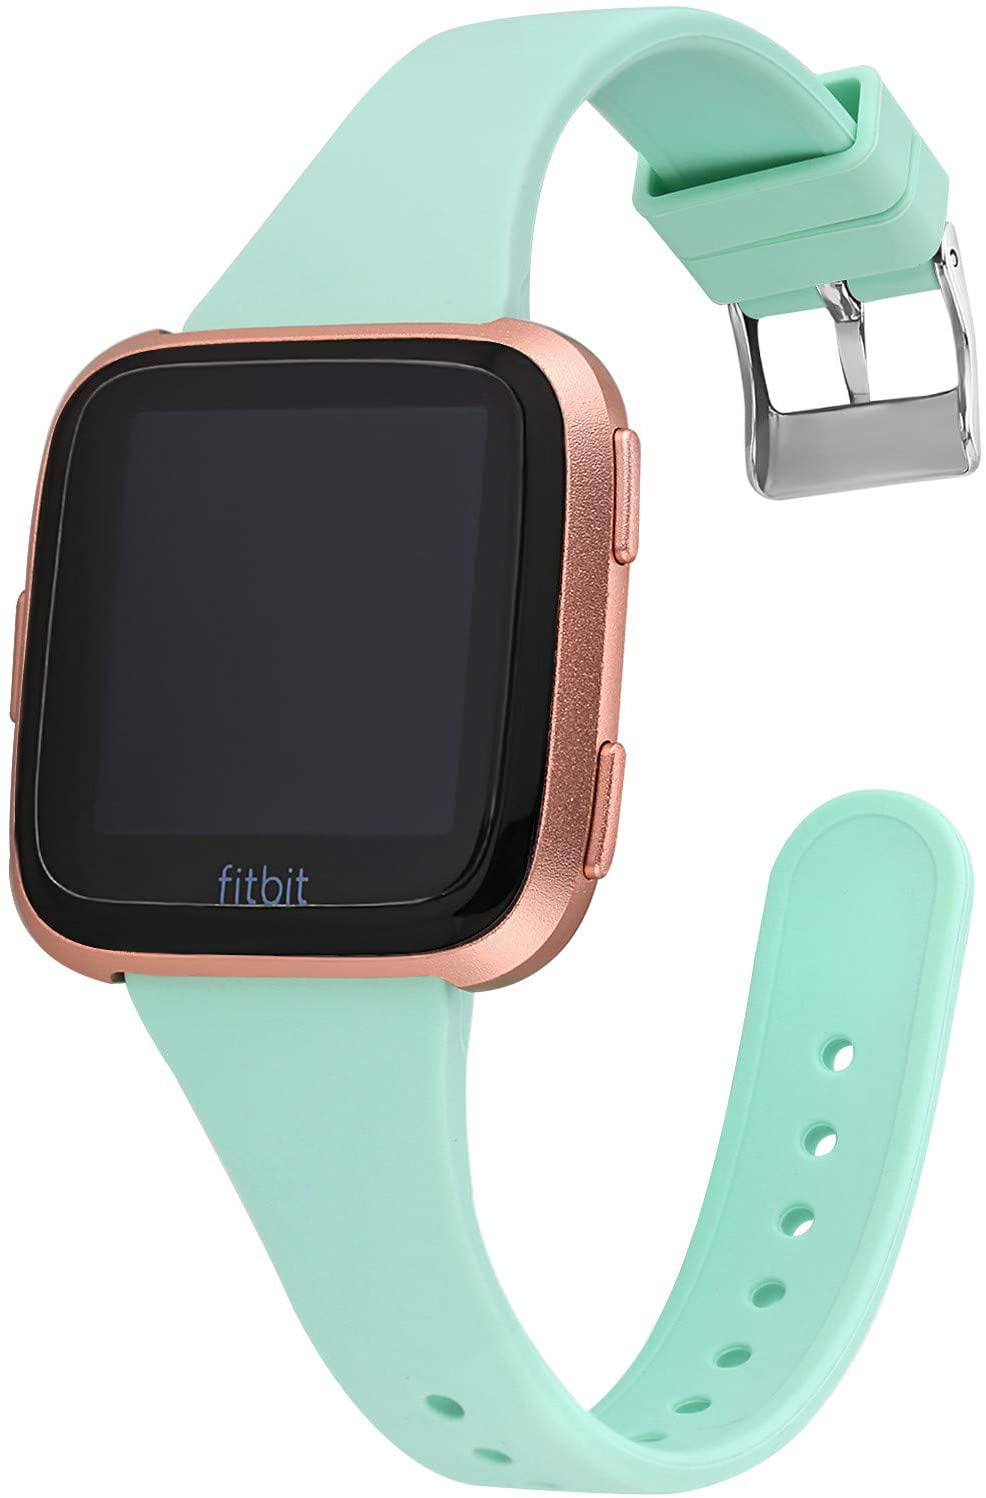 thin fitbit band